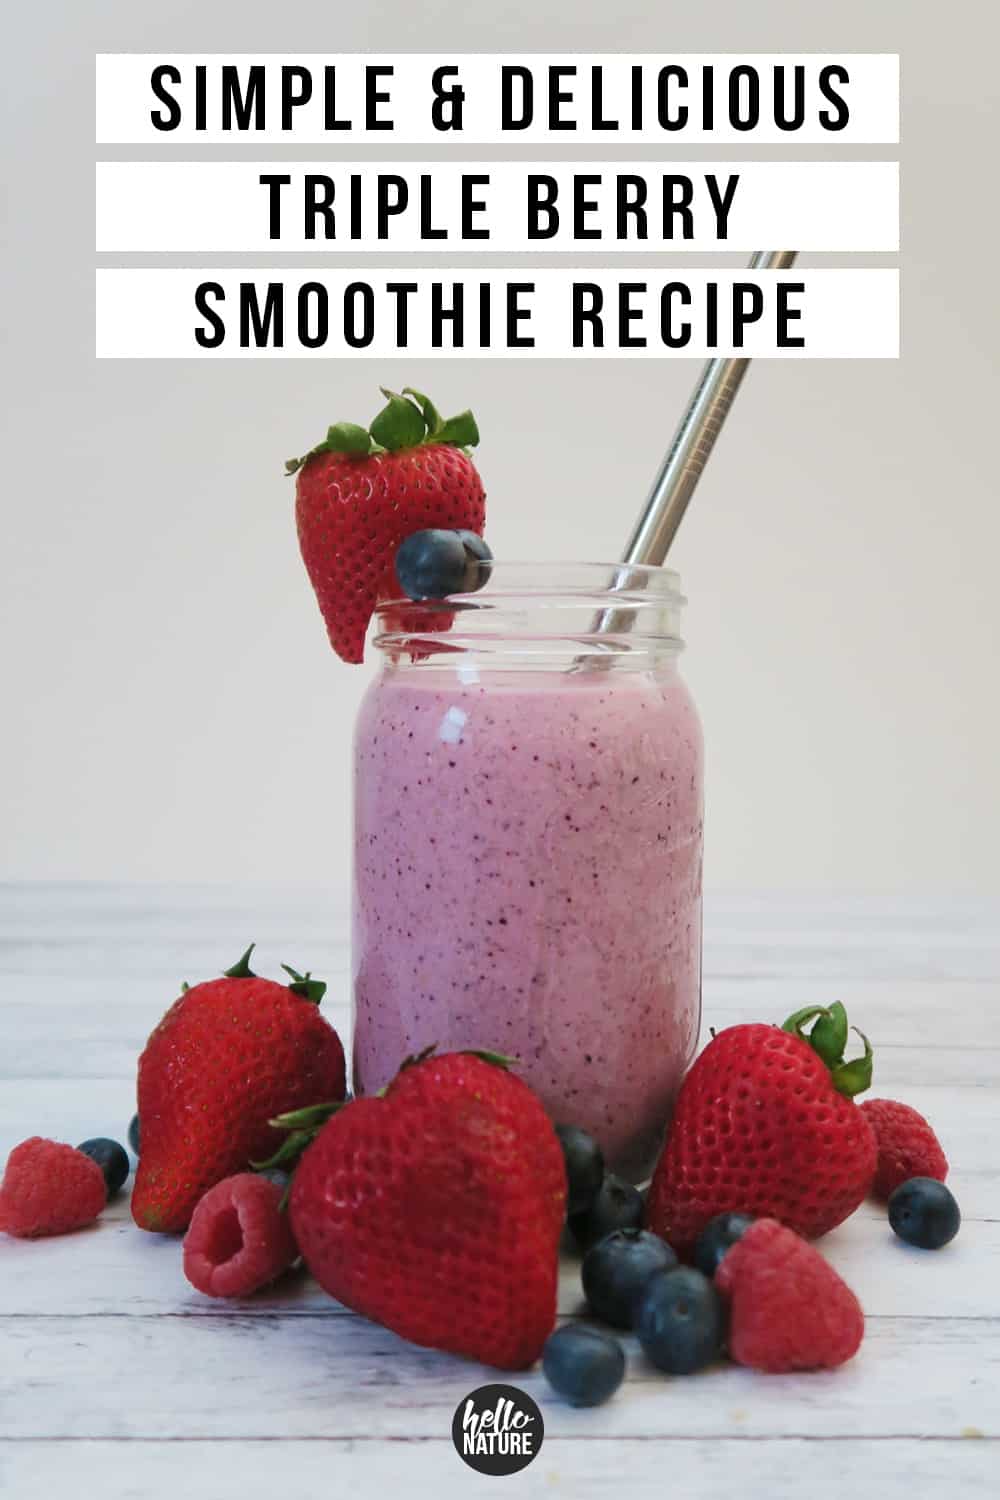 If you want a delicious breakfast berry smoothie with almond milk, you'll love this three berry smoothie with greek yogurt! It's a ninja berry smoothie that kids and adults will love! Click over to get the berry and yogurt smoothie ingredients so you can start your day off right! #BerrySmoothie #Smoothe #SmoothieRecipe #BreakfastSmoothie #BreakfastRecipe #HealthyEating